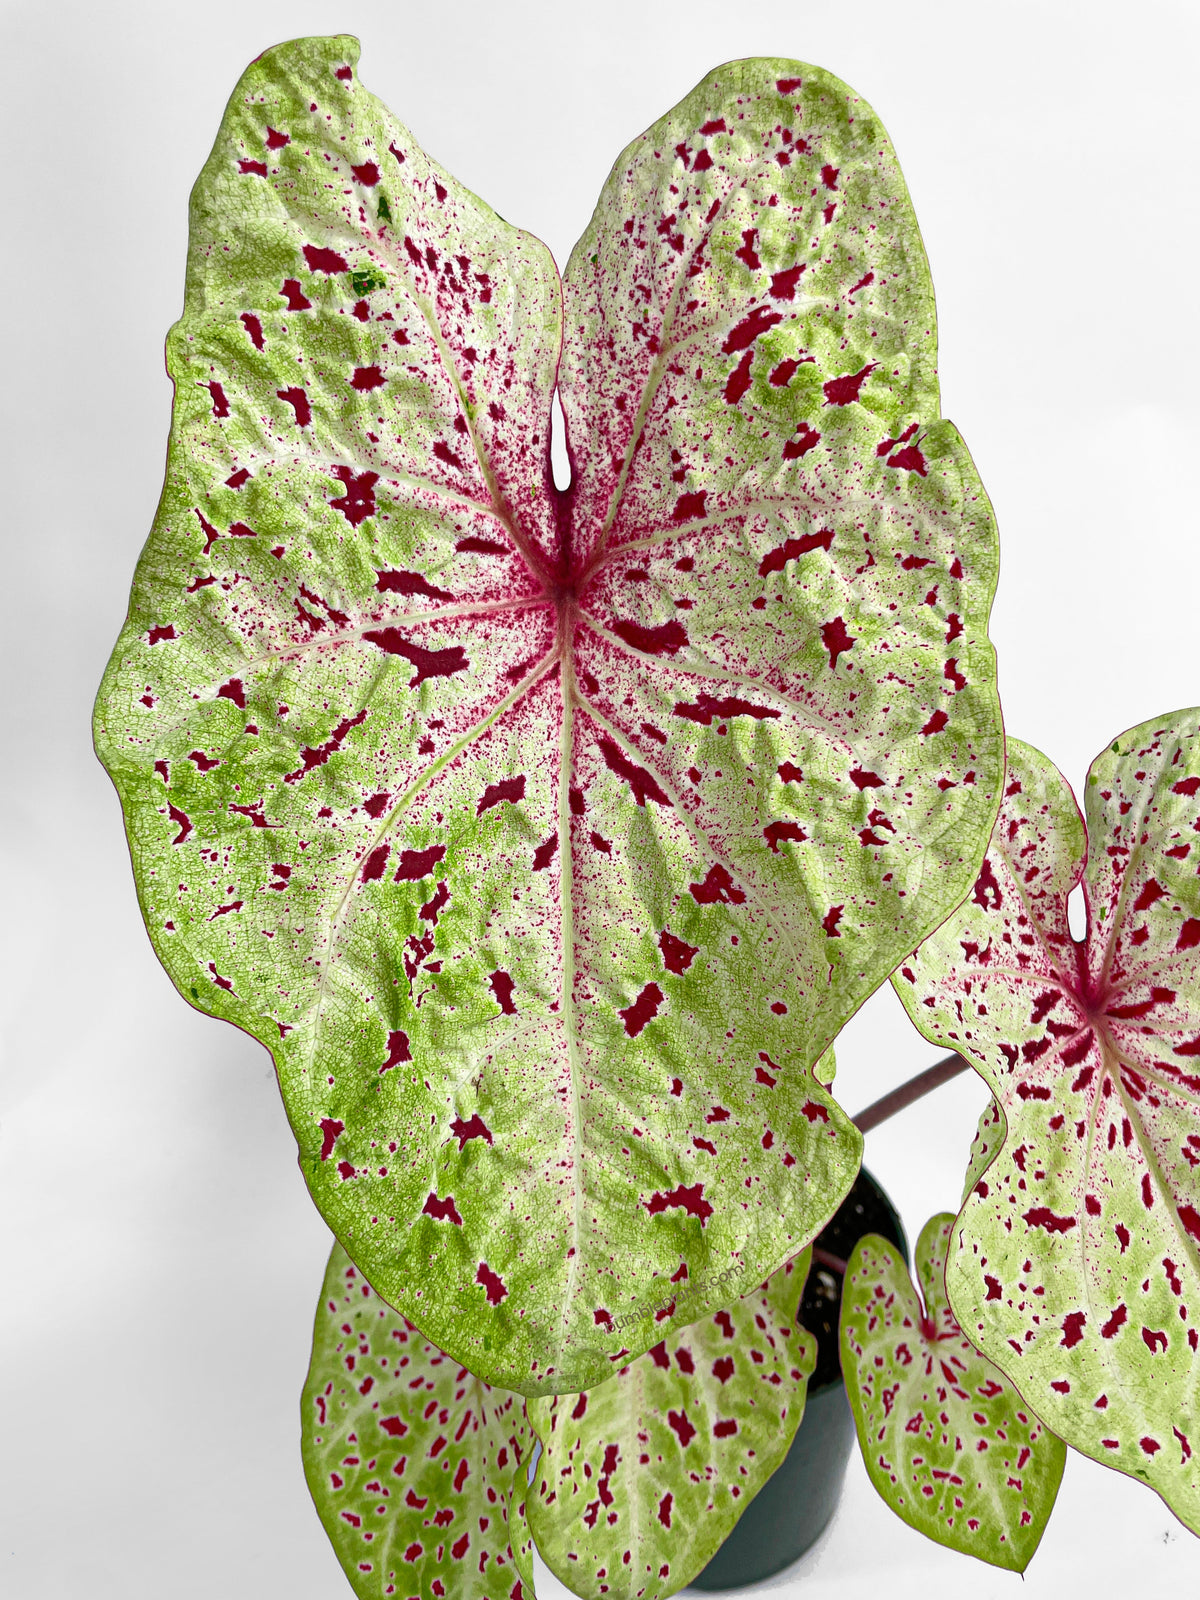 Caladium Miss Muffet by Bumble Plants